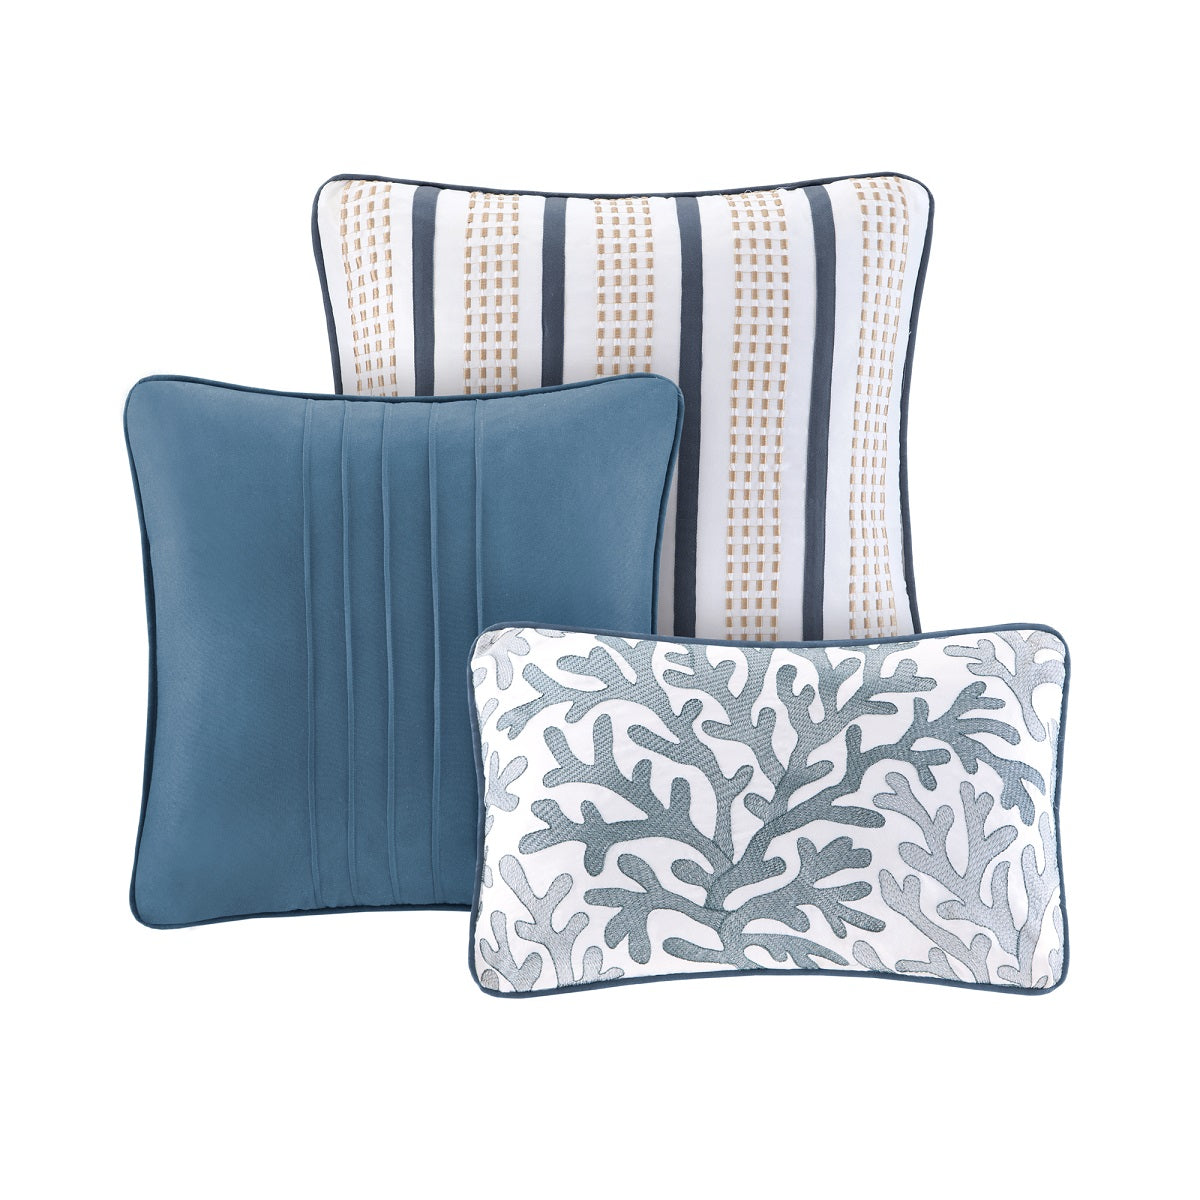 Bayside Quilt Set with Throw Pillows